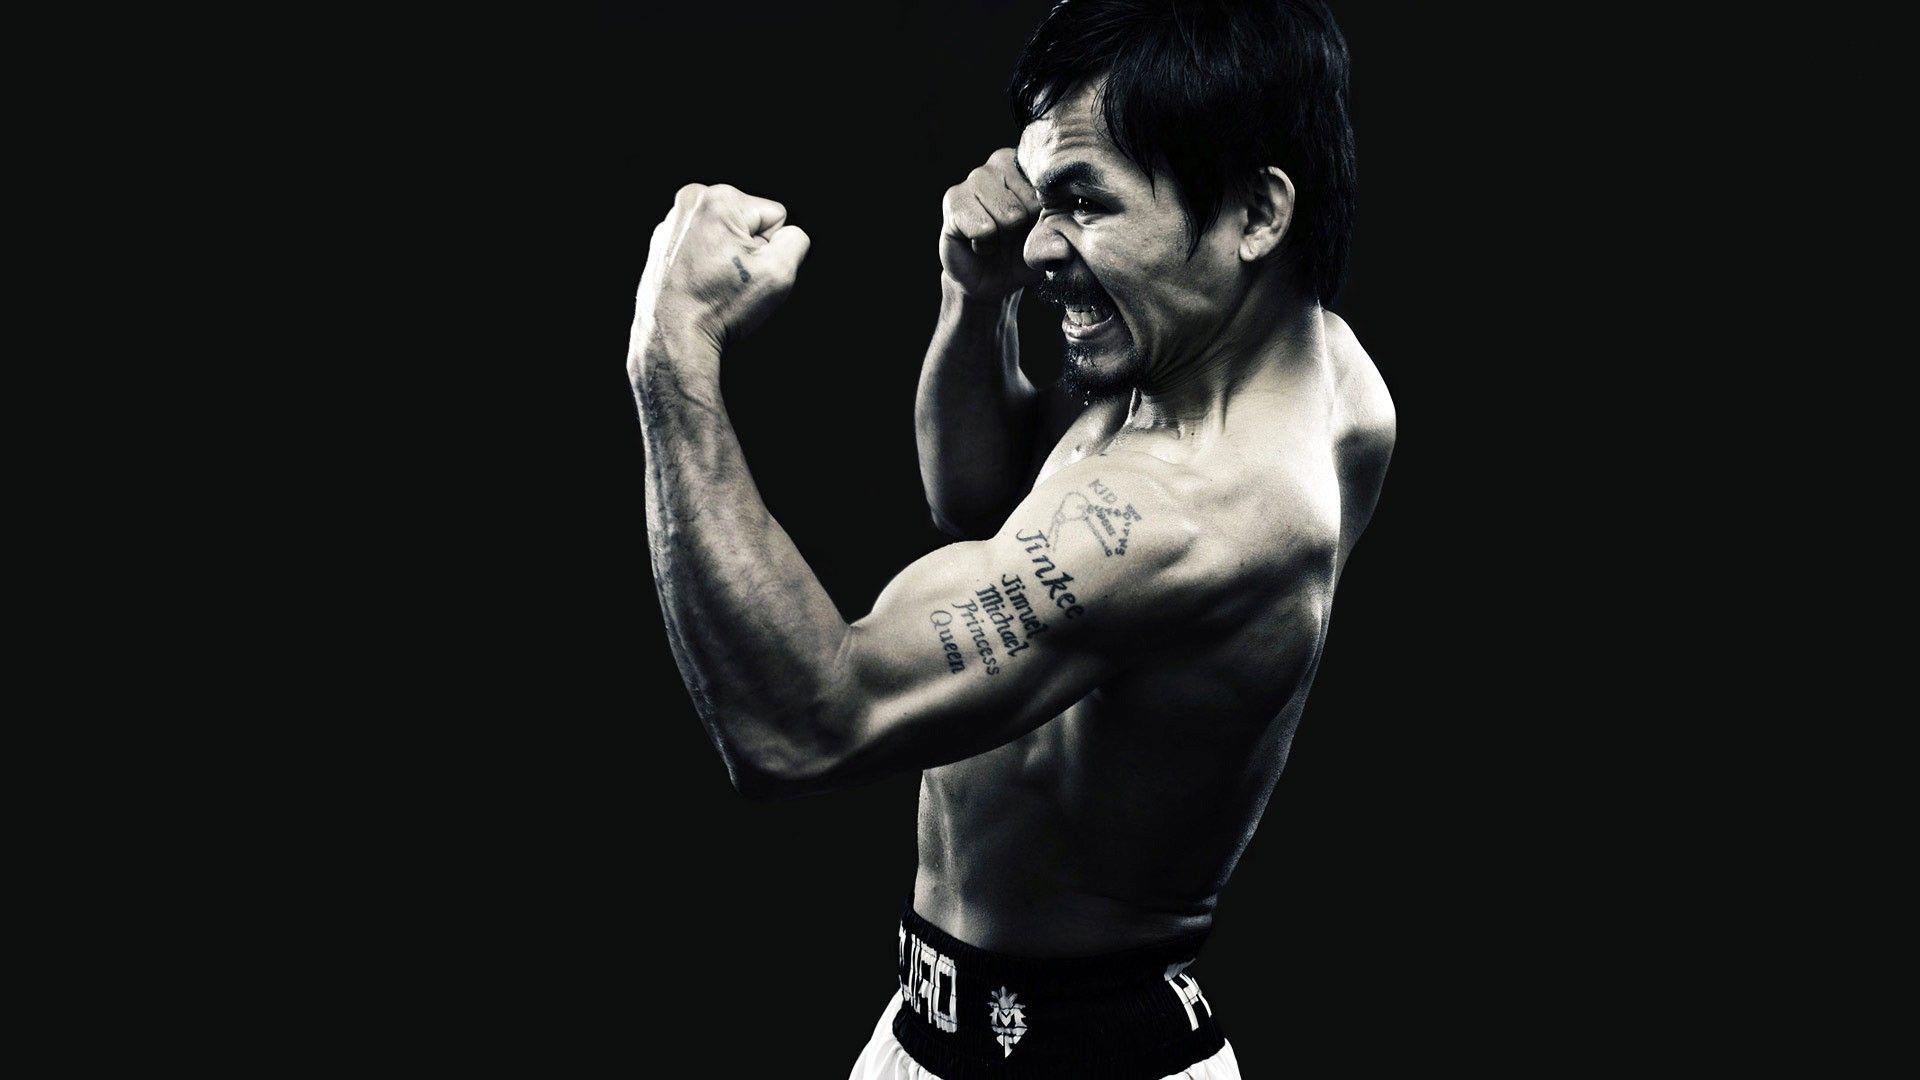 Manny Pacquiao 2015 Boxing Wallpaper free desktop background